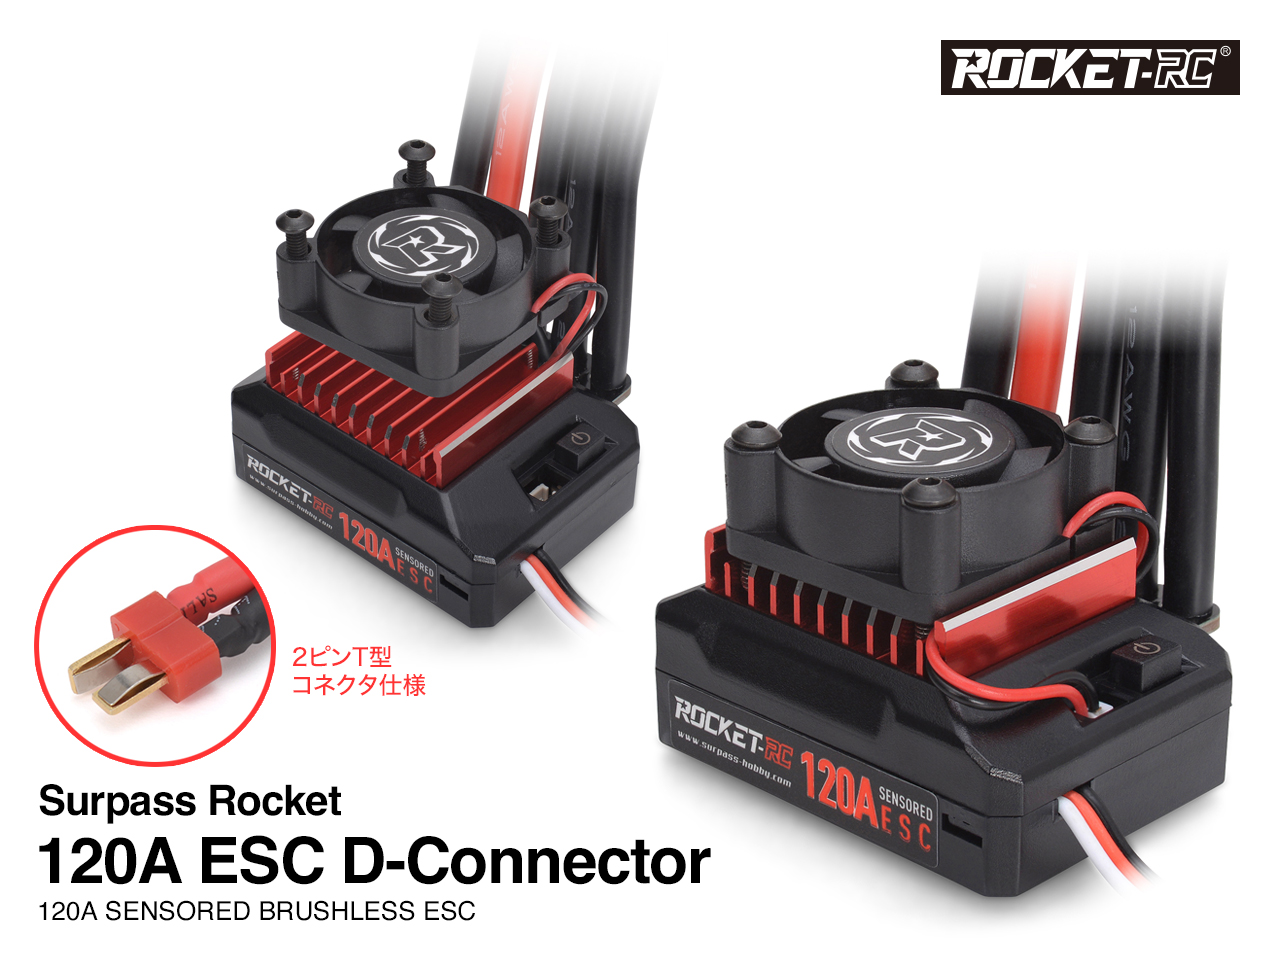 G-FORCE Surpass Rocket サーパス・ロケット120A ESC D-Connector SPH805